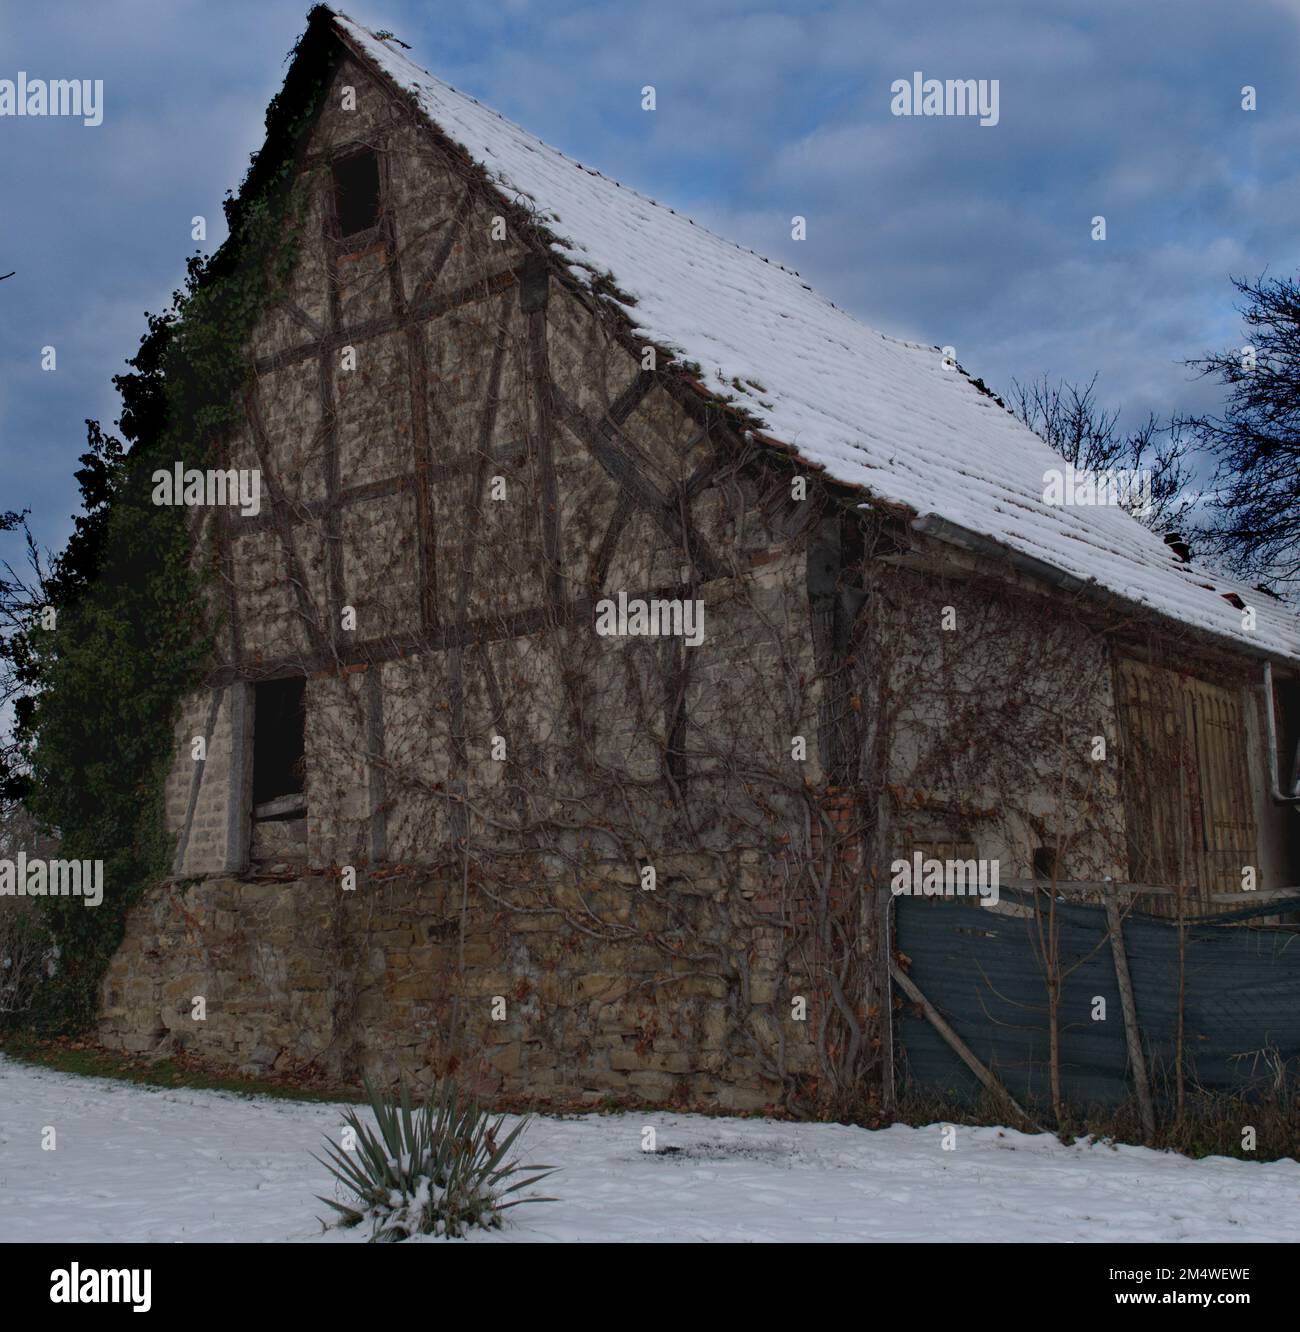 Old half timber house in winter with a small plant in the foreground. Stock Photo